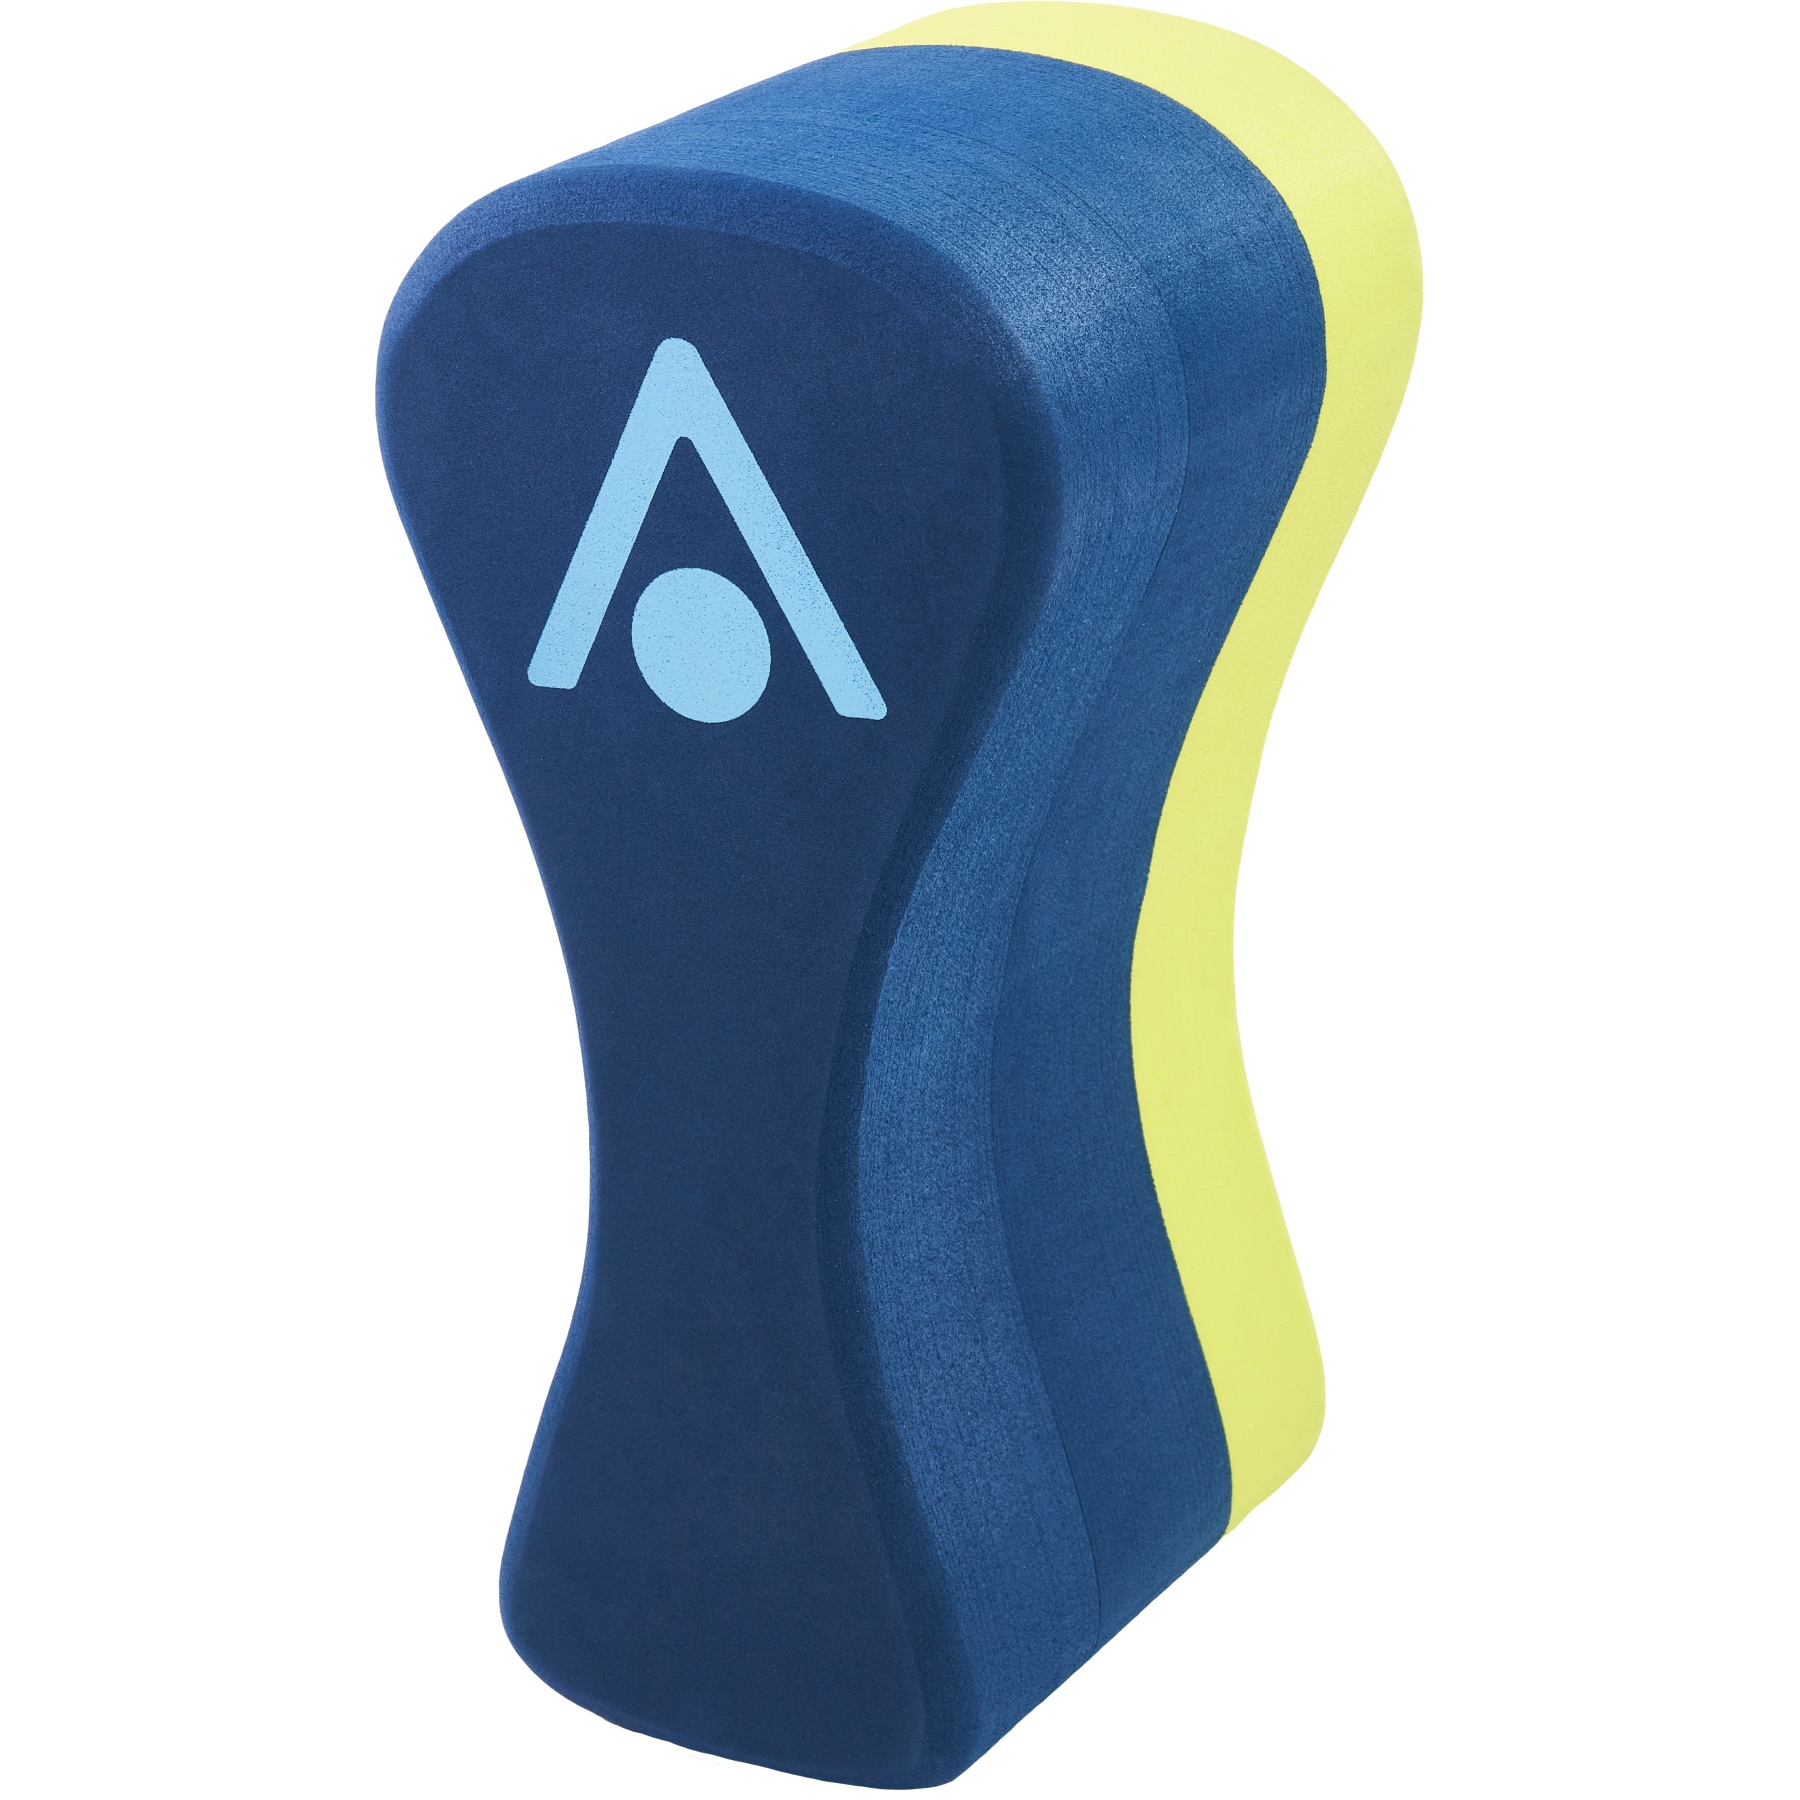 Picture of AQUASPHERE Pull Buoy - Navy Blue/Bright Yellow